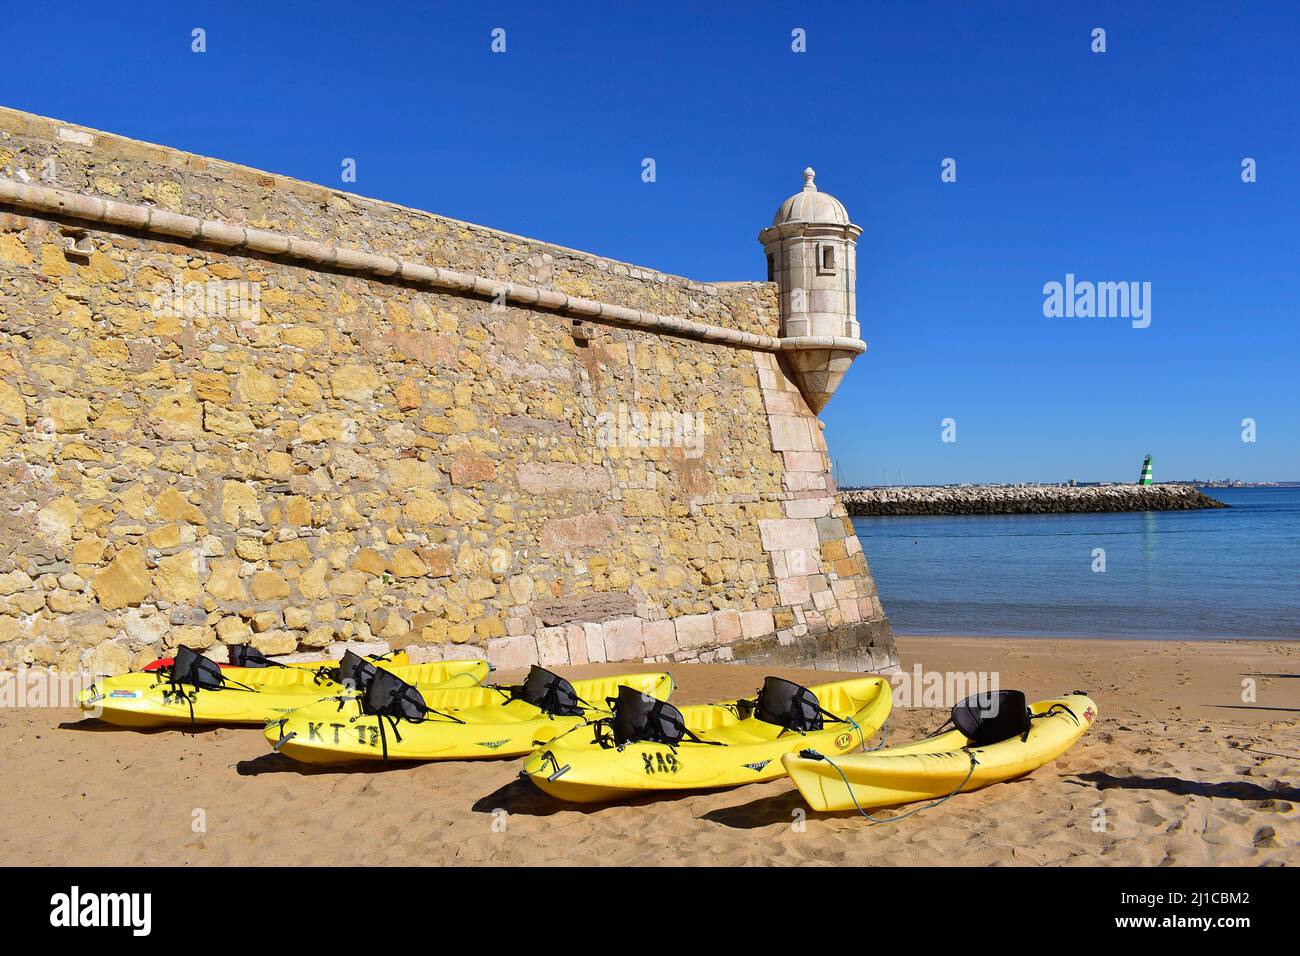 Yellow kayaks on the beach ready for an excursion out on the ocean, Lagos fortress, Algarve, Portugal, Europe Stock Photo